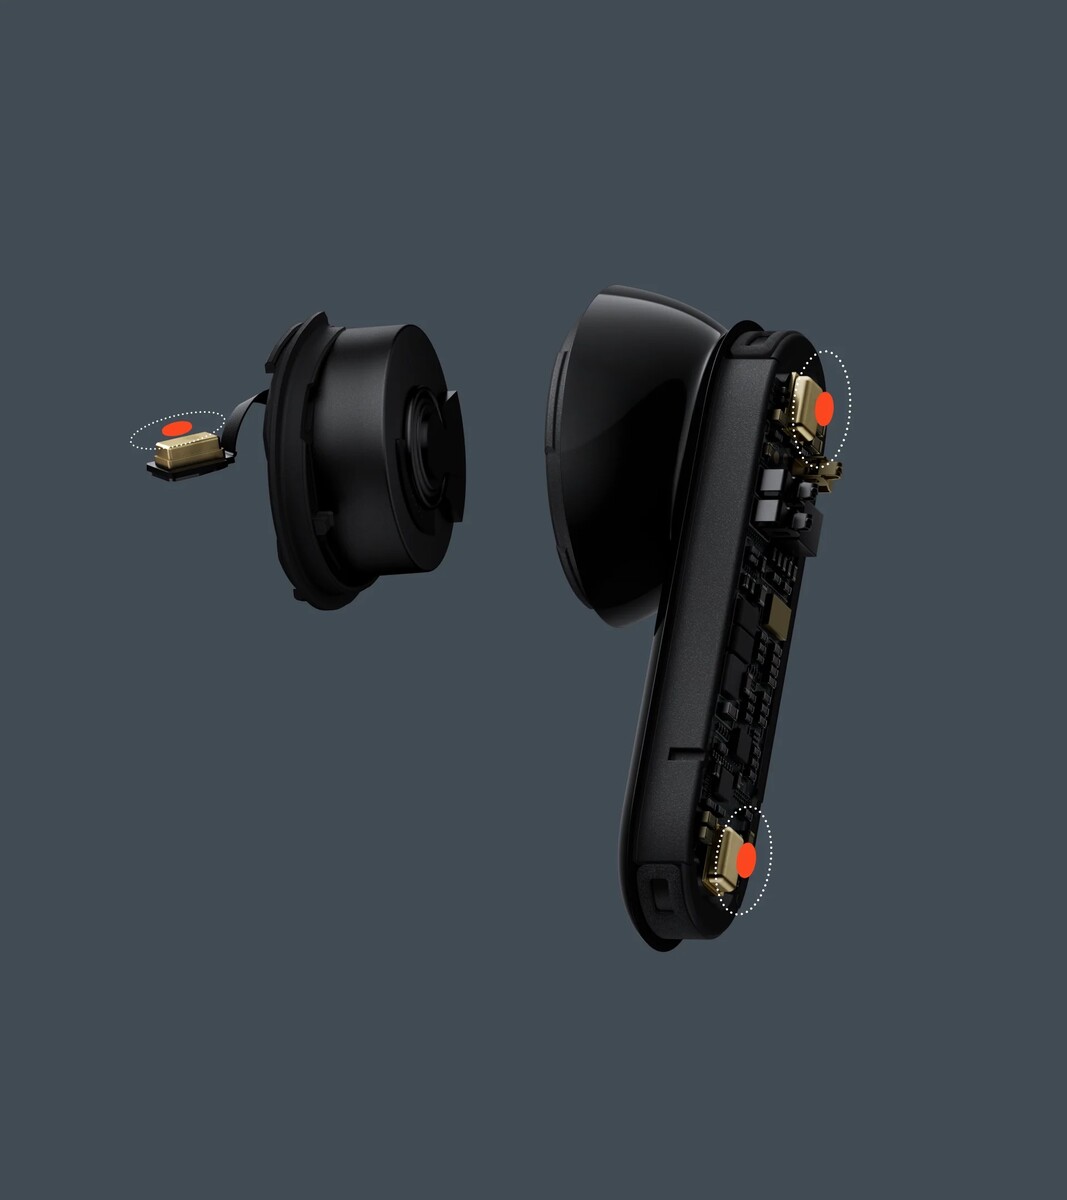 Xiaomi Redmi Buds 5: Budget earbuds look to impress with ANC, Bluetooth 5.3  and Bluetooth Multipoint -  News